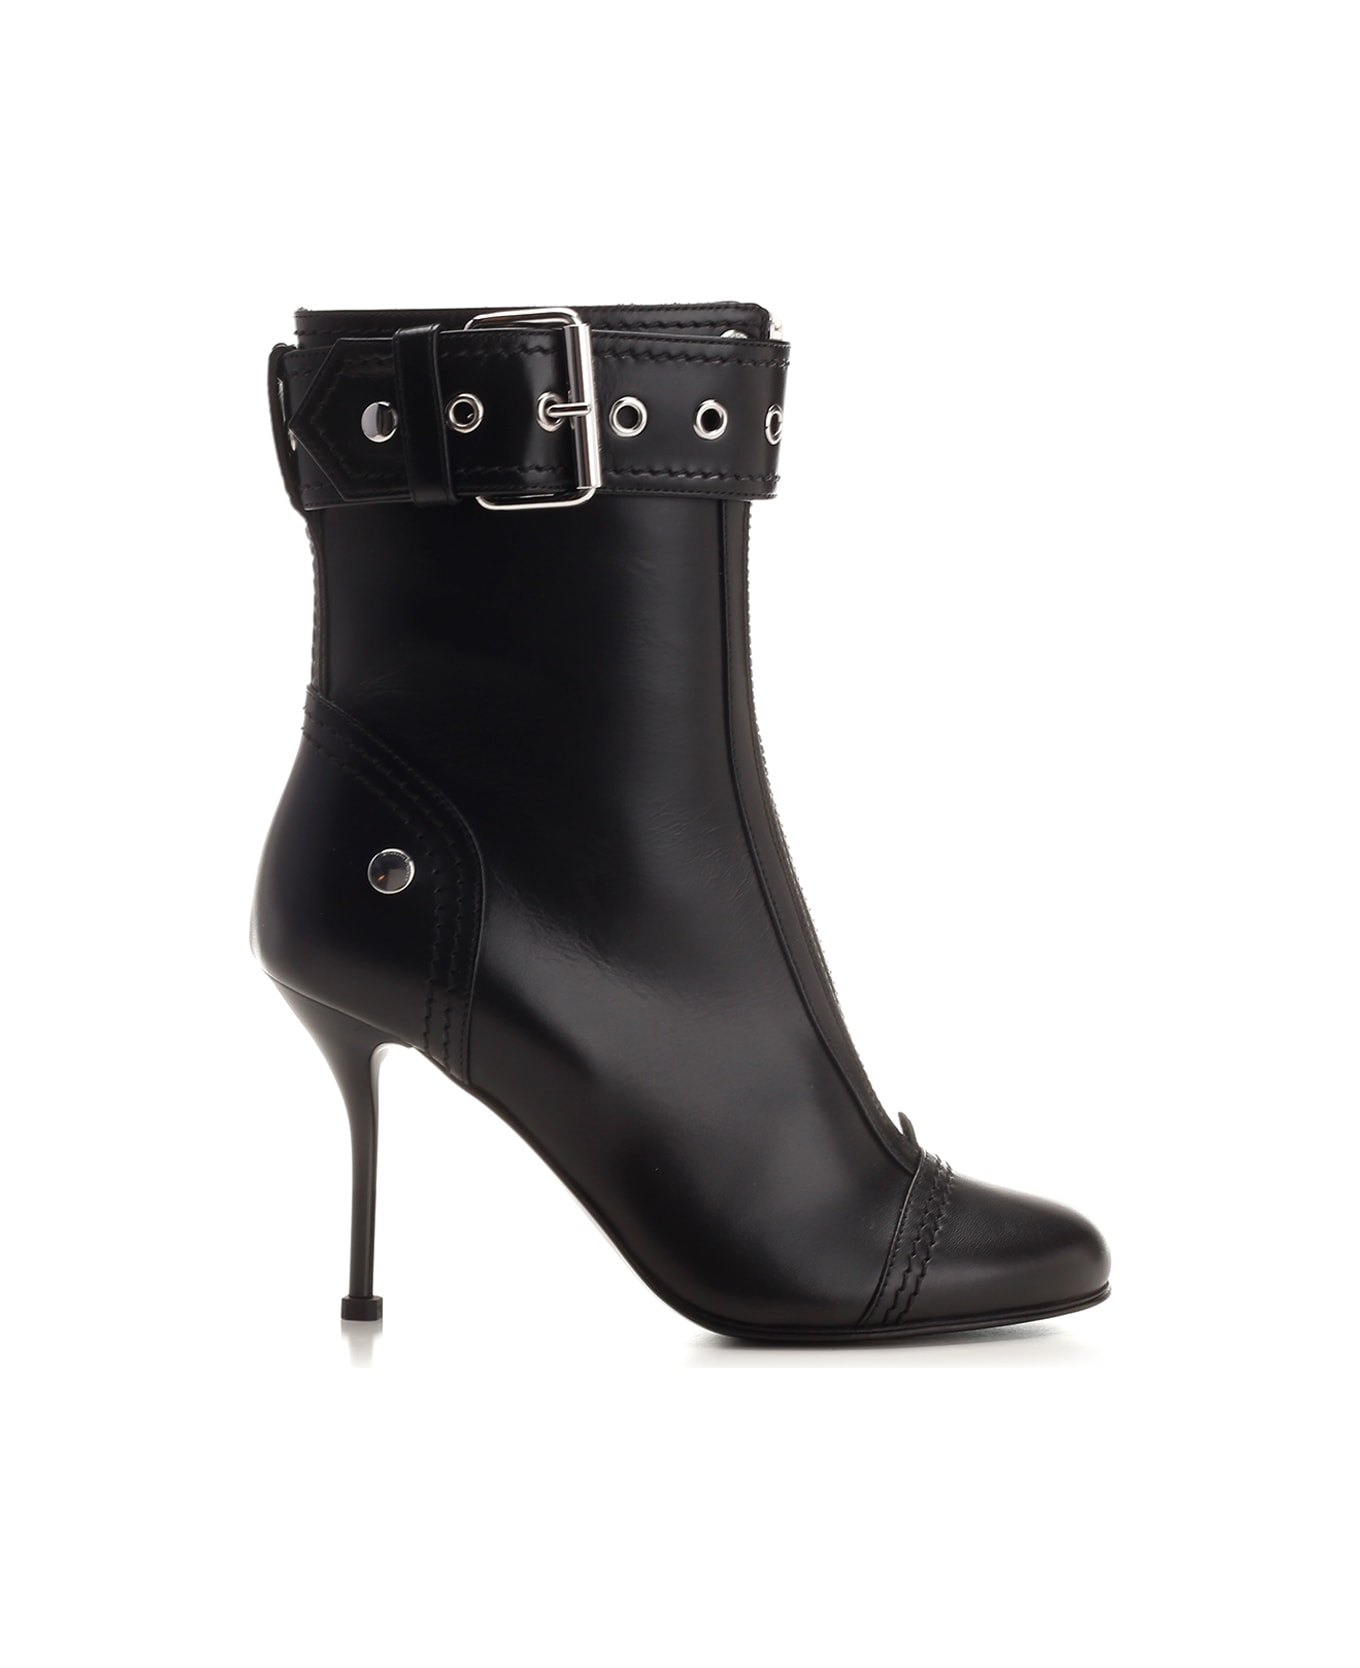 Alexander McQueen Leather Ankle Boots - Black Silver ブーツ